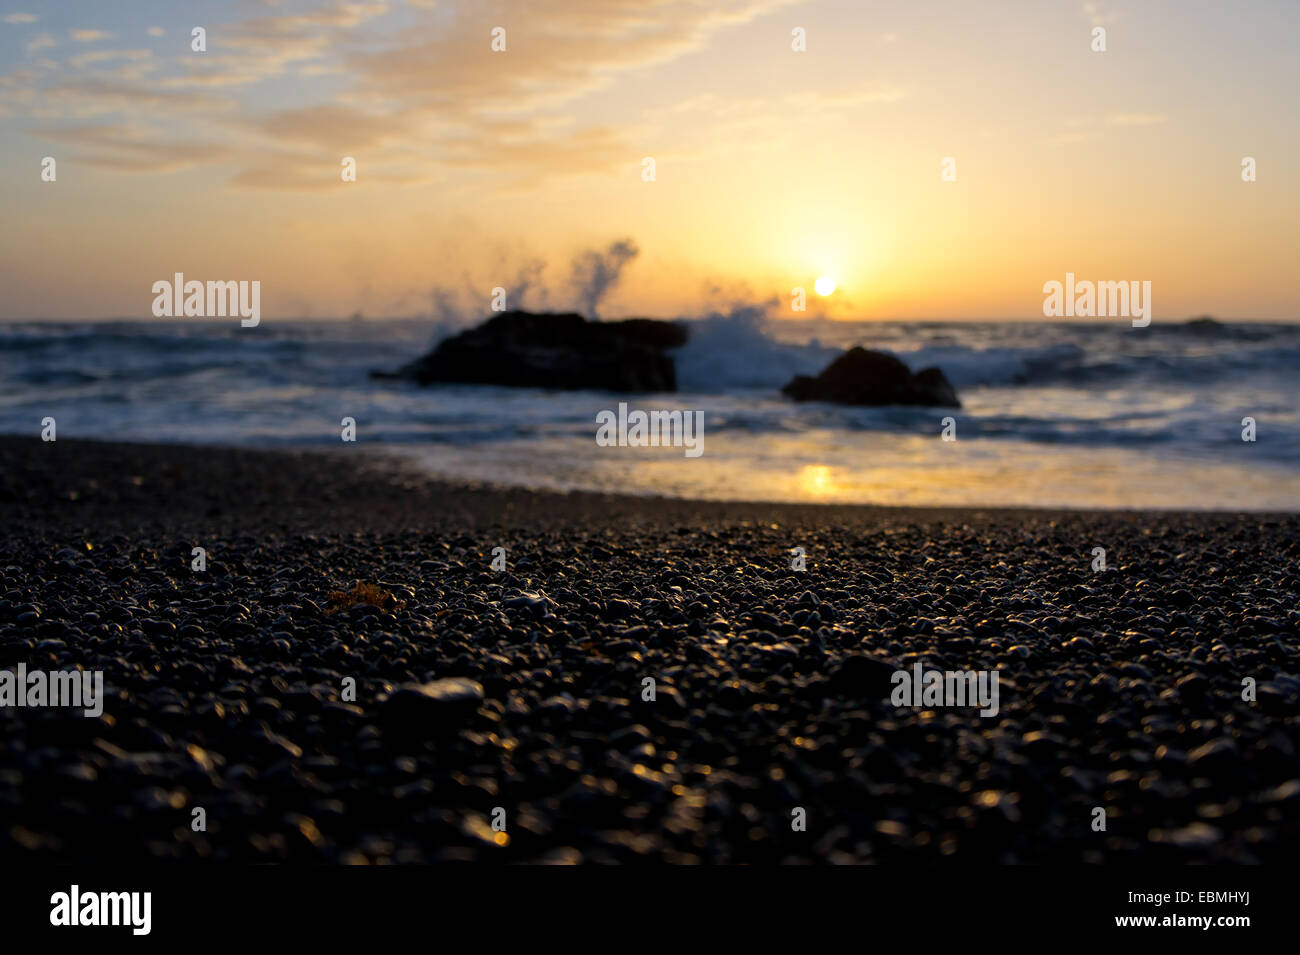 Abstract blurred ocean shore and romantic sunset. Focus on illuminated pebbles. Shallow depth of field. Lanzarote, Canary Island Stock Photo